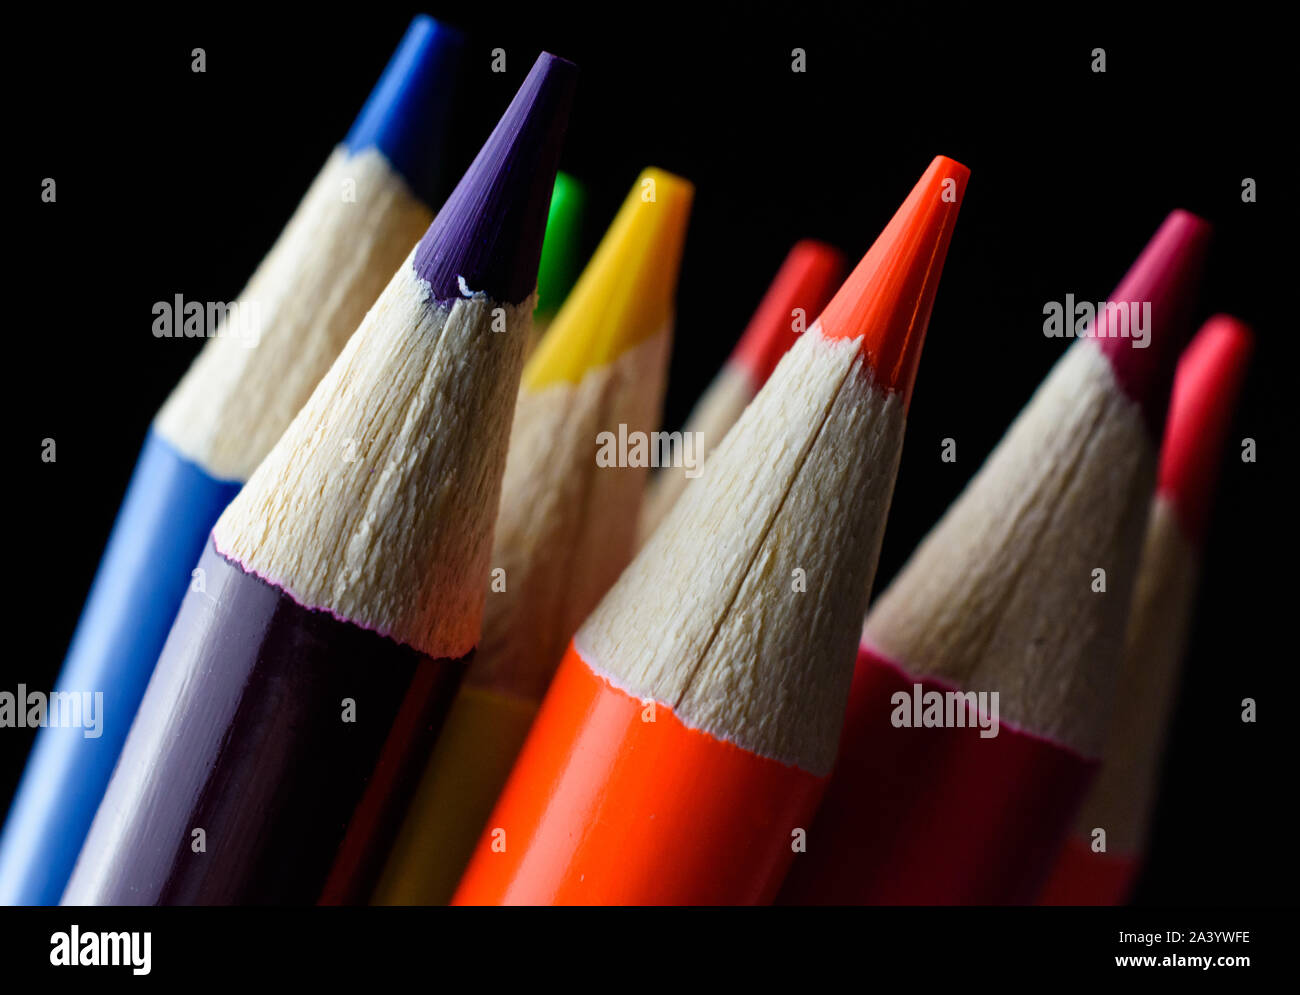 Closeup of bright wooden neon colored pencil tips isolated on black background Stock Photo